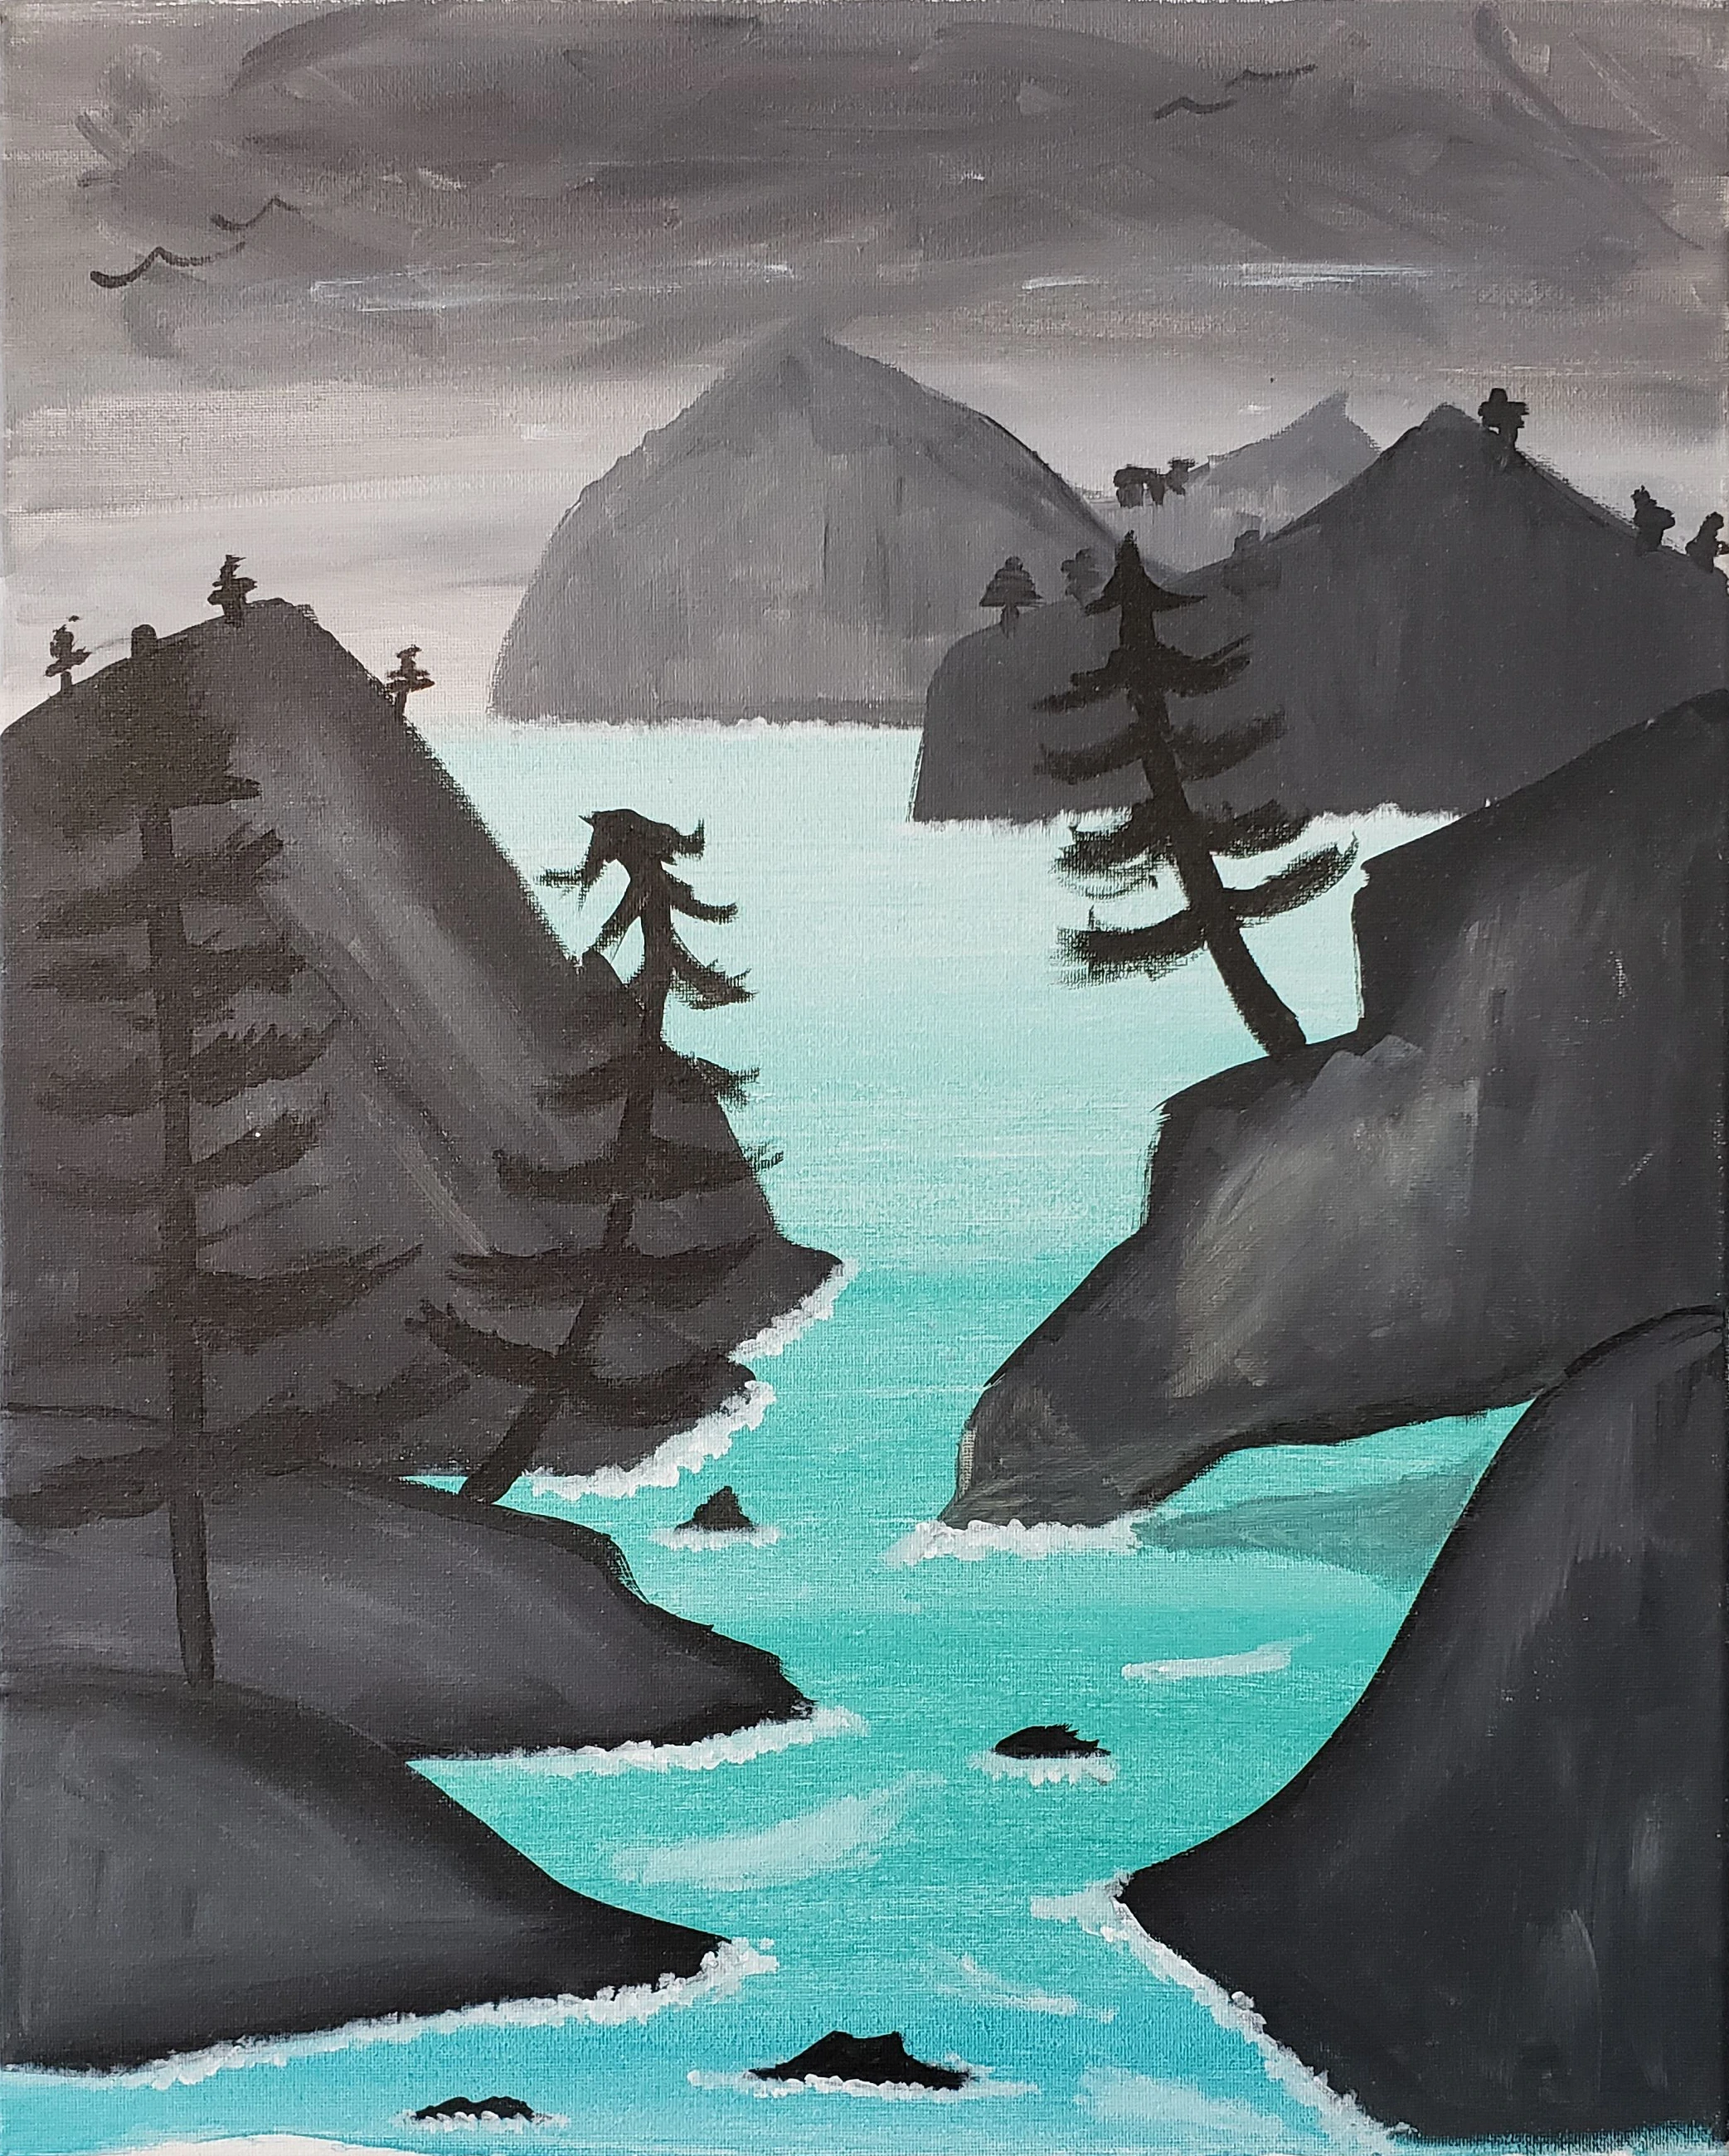 Landscape painting of a gray, misty cove with trees and light blue water